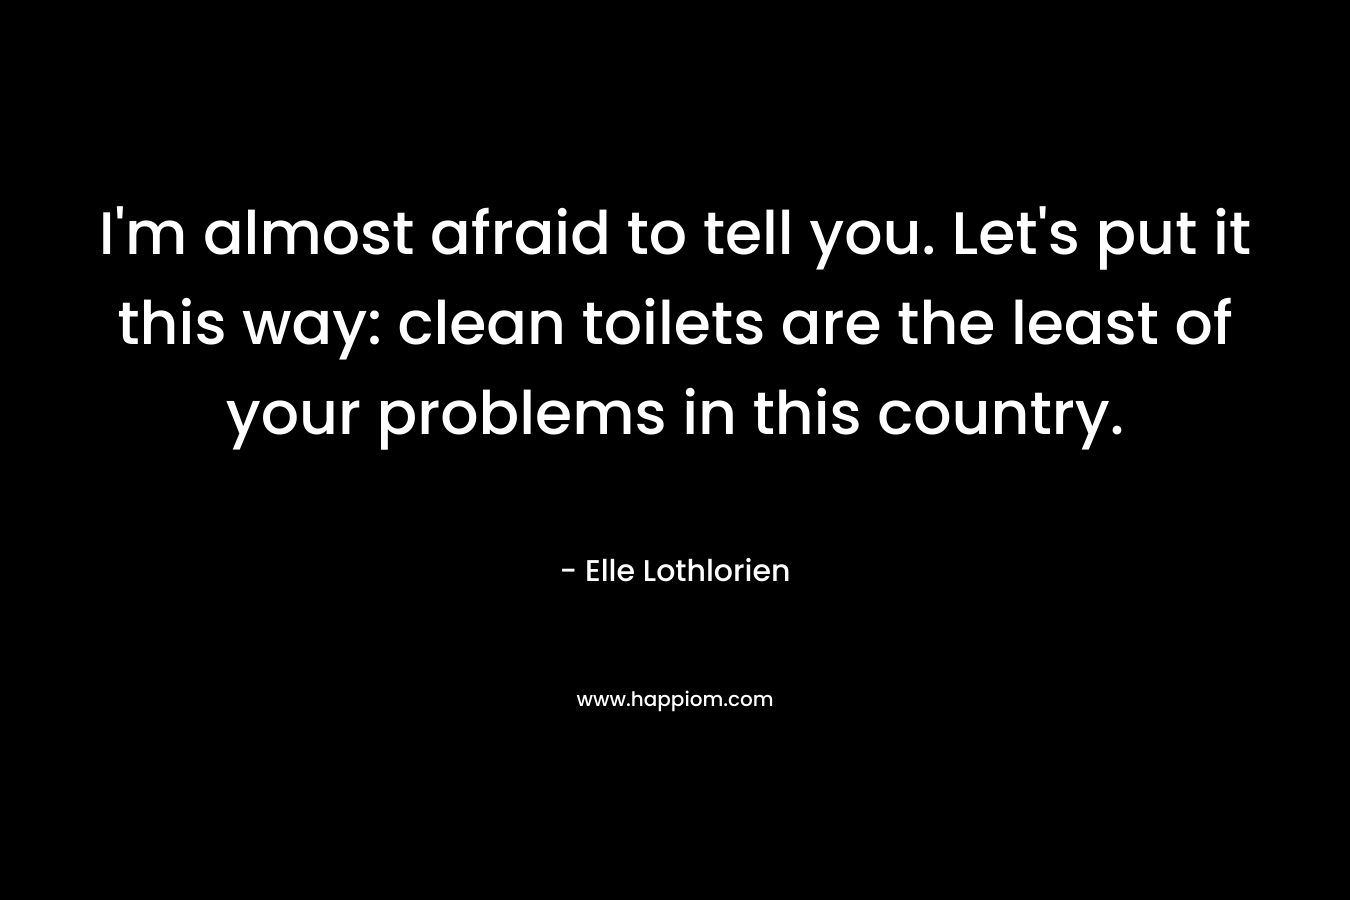 I’m almost afraid to tell you. Let’s put it this way: clean toilets are the least of your problems in this country. – Elle Lothlorien